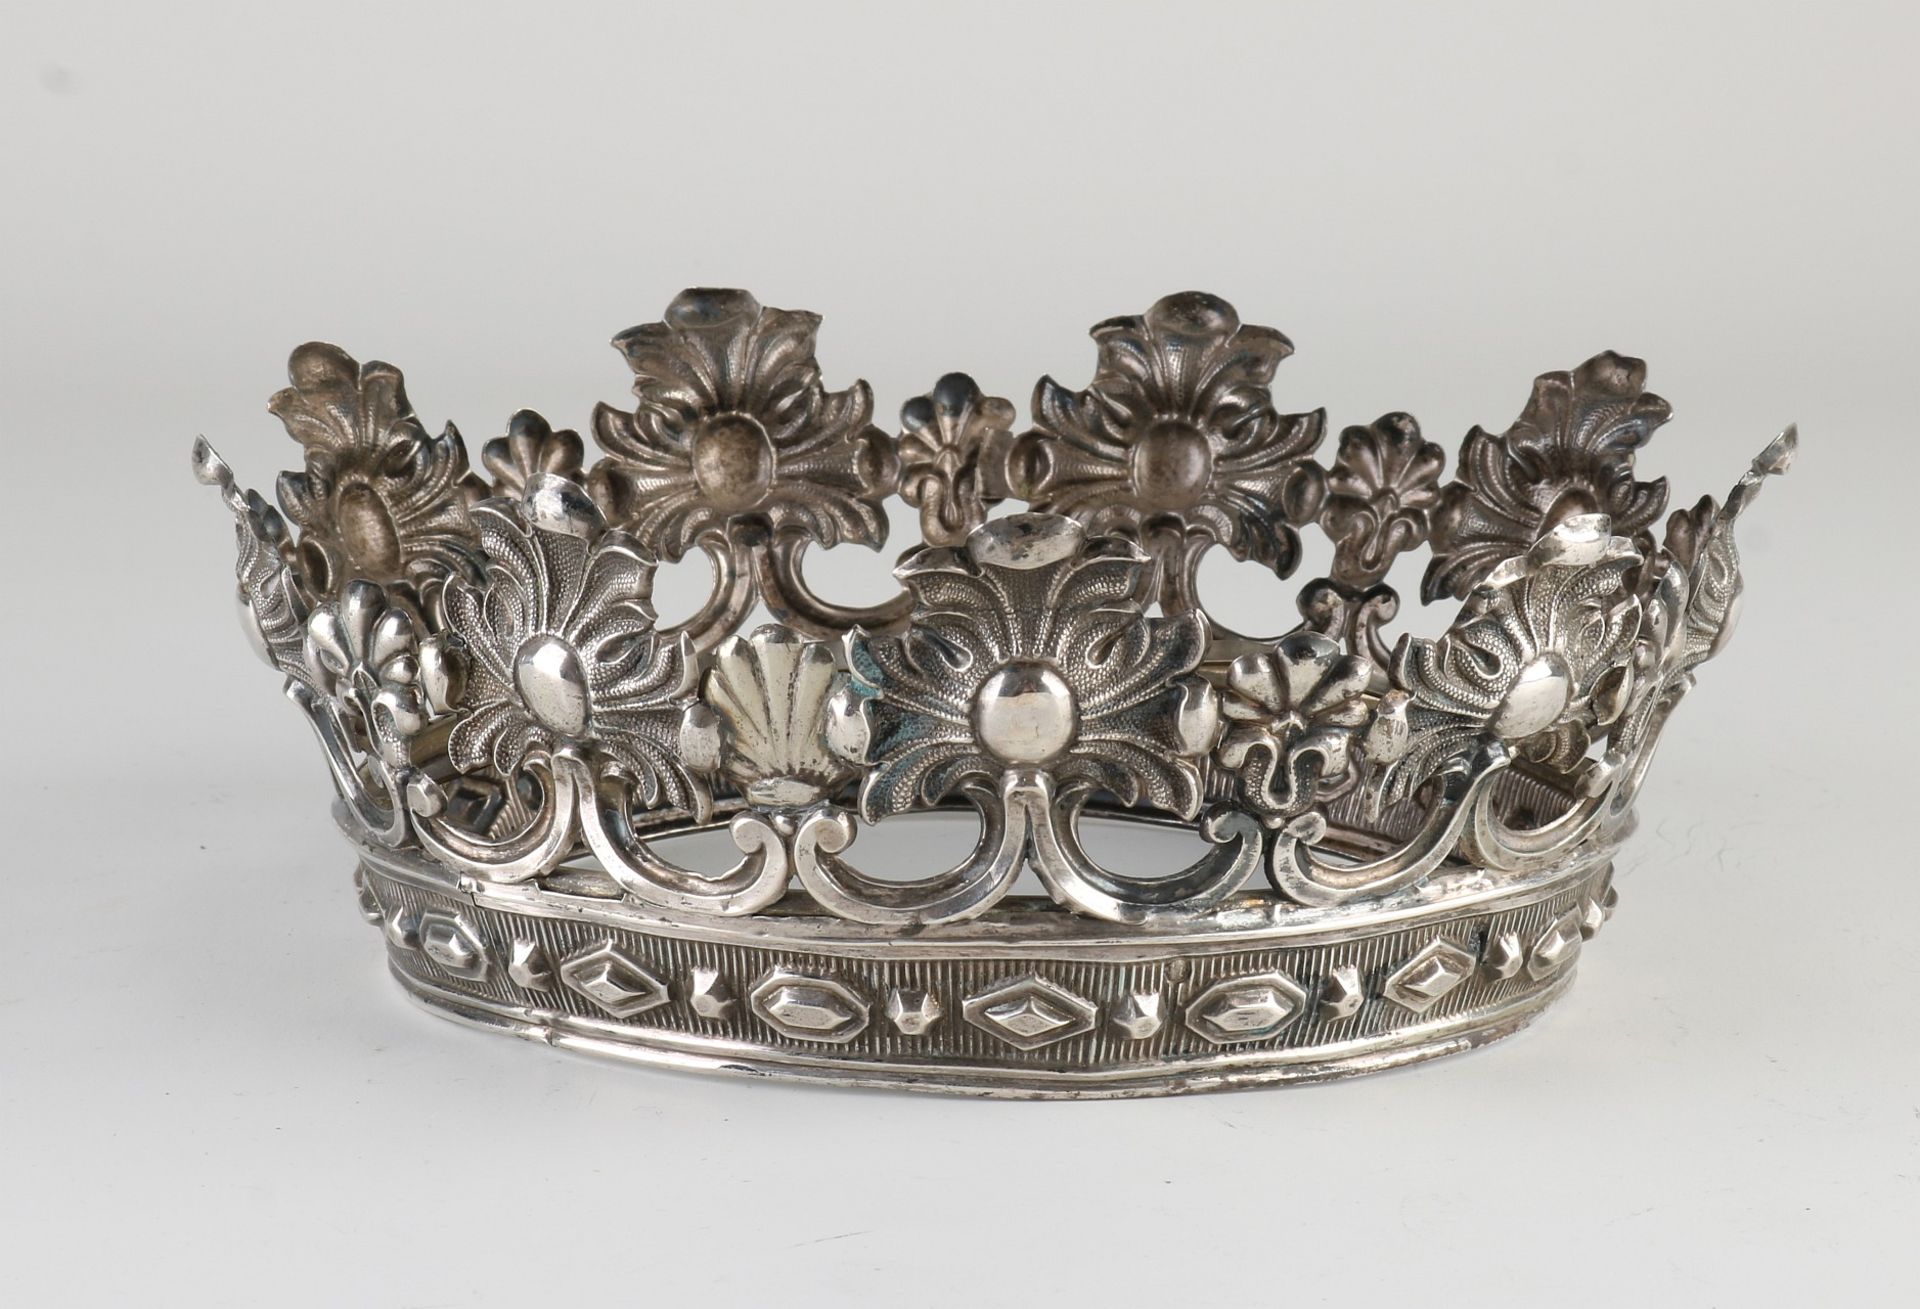 Silver ecclesiastical crown of the Holy Statue